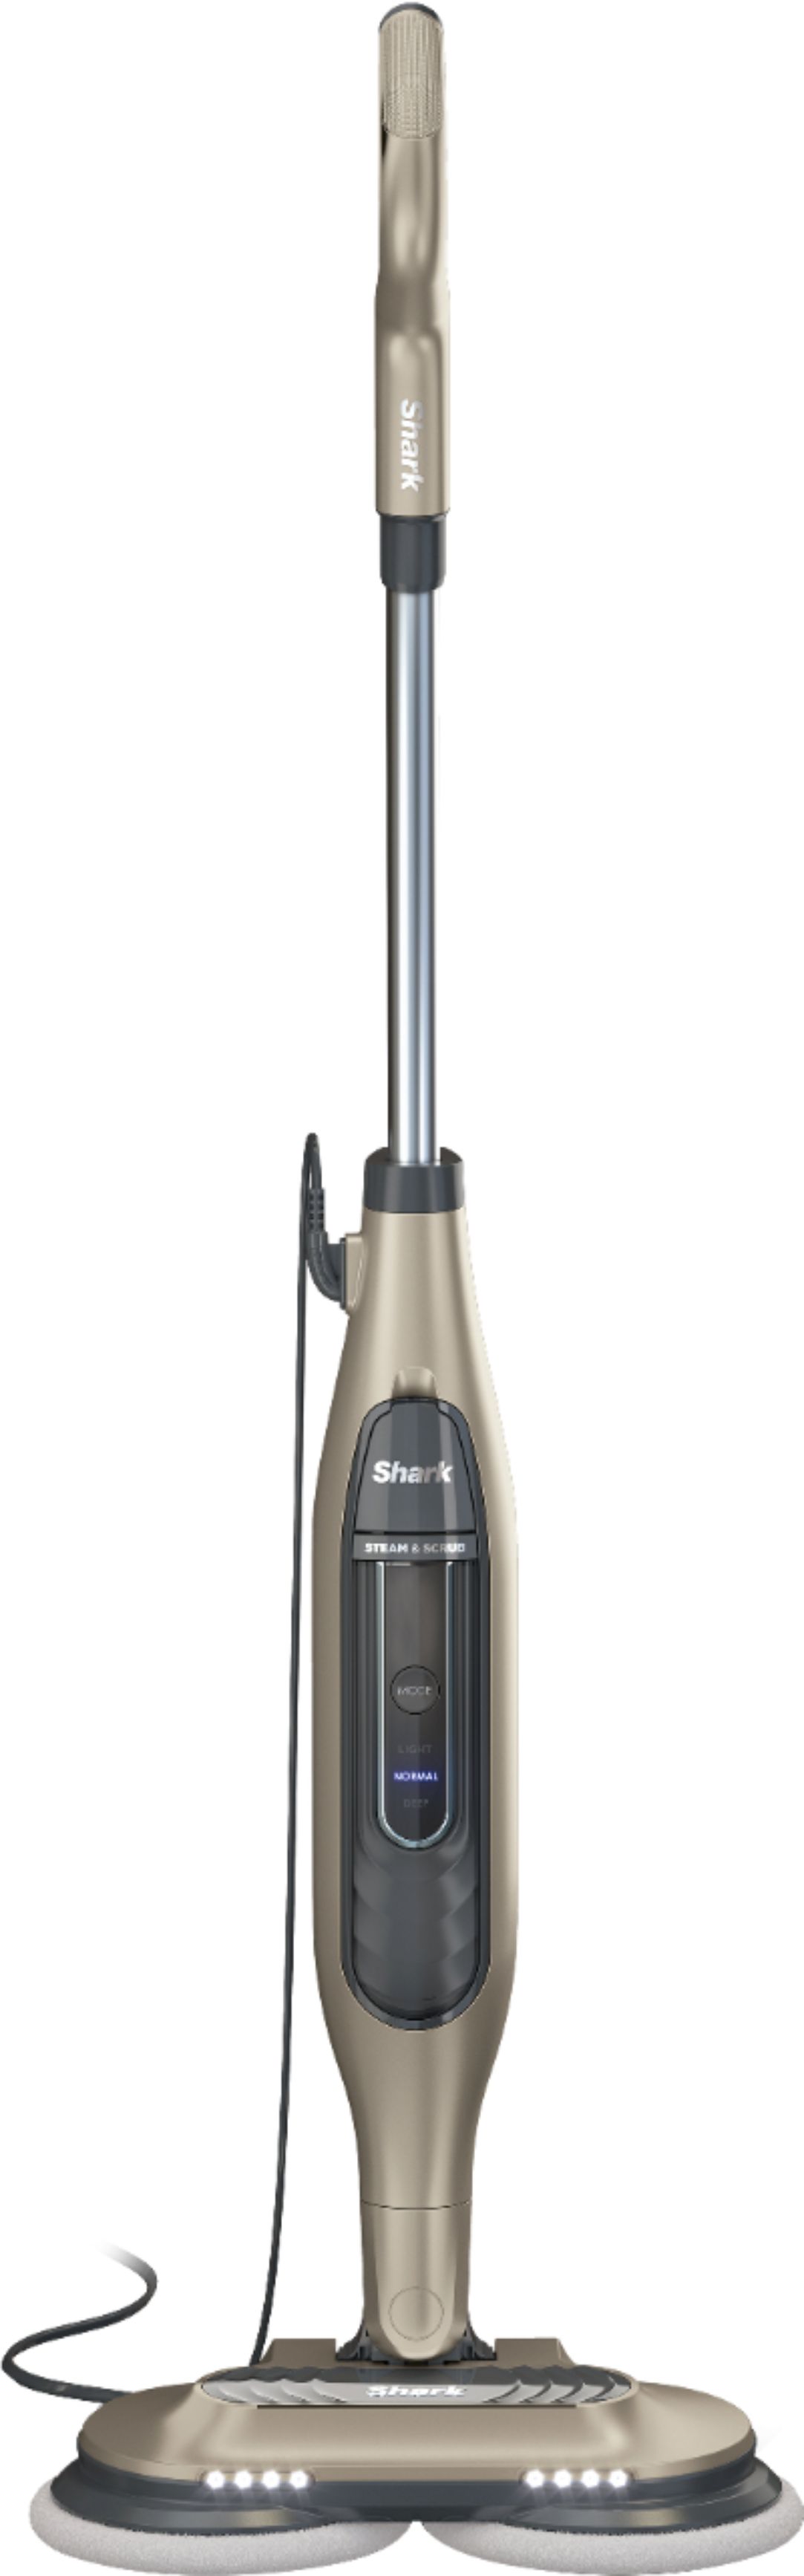 Best Buy: Shark Professional Steam and Spray Mop Lavender SK460